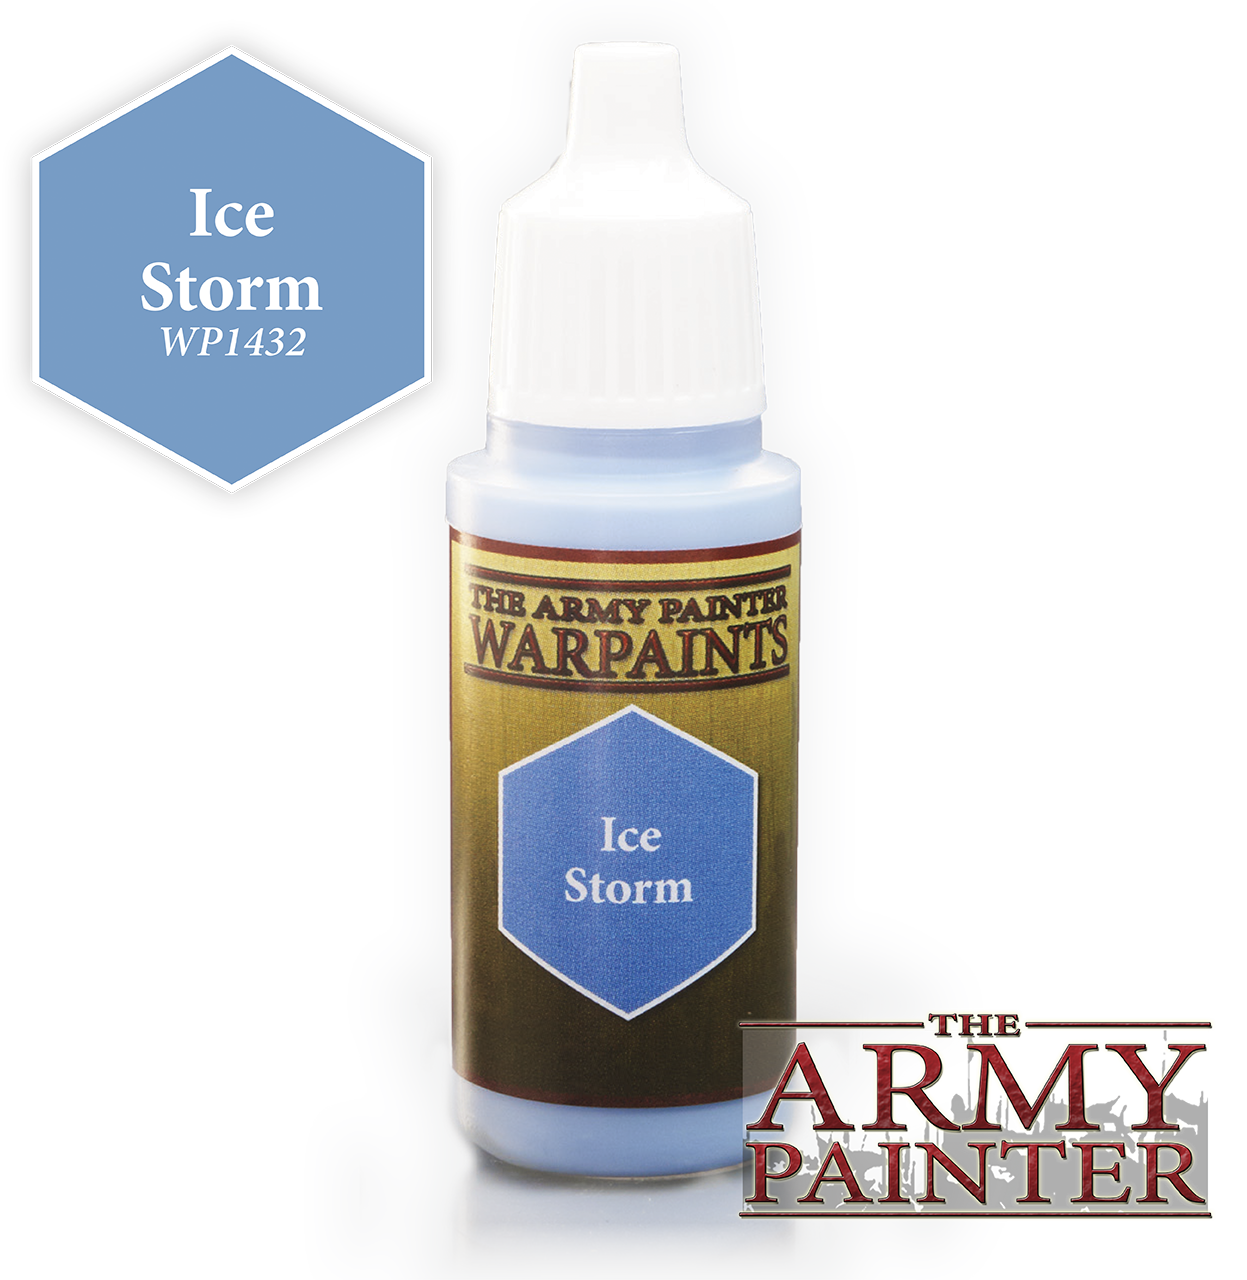 The ARMY PAINTER: Acrylics Warpaint - Ice Storm | Tacoma Games